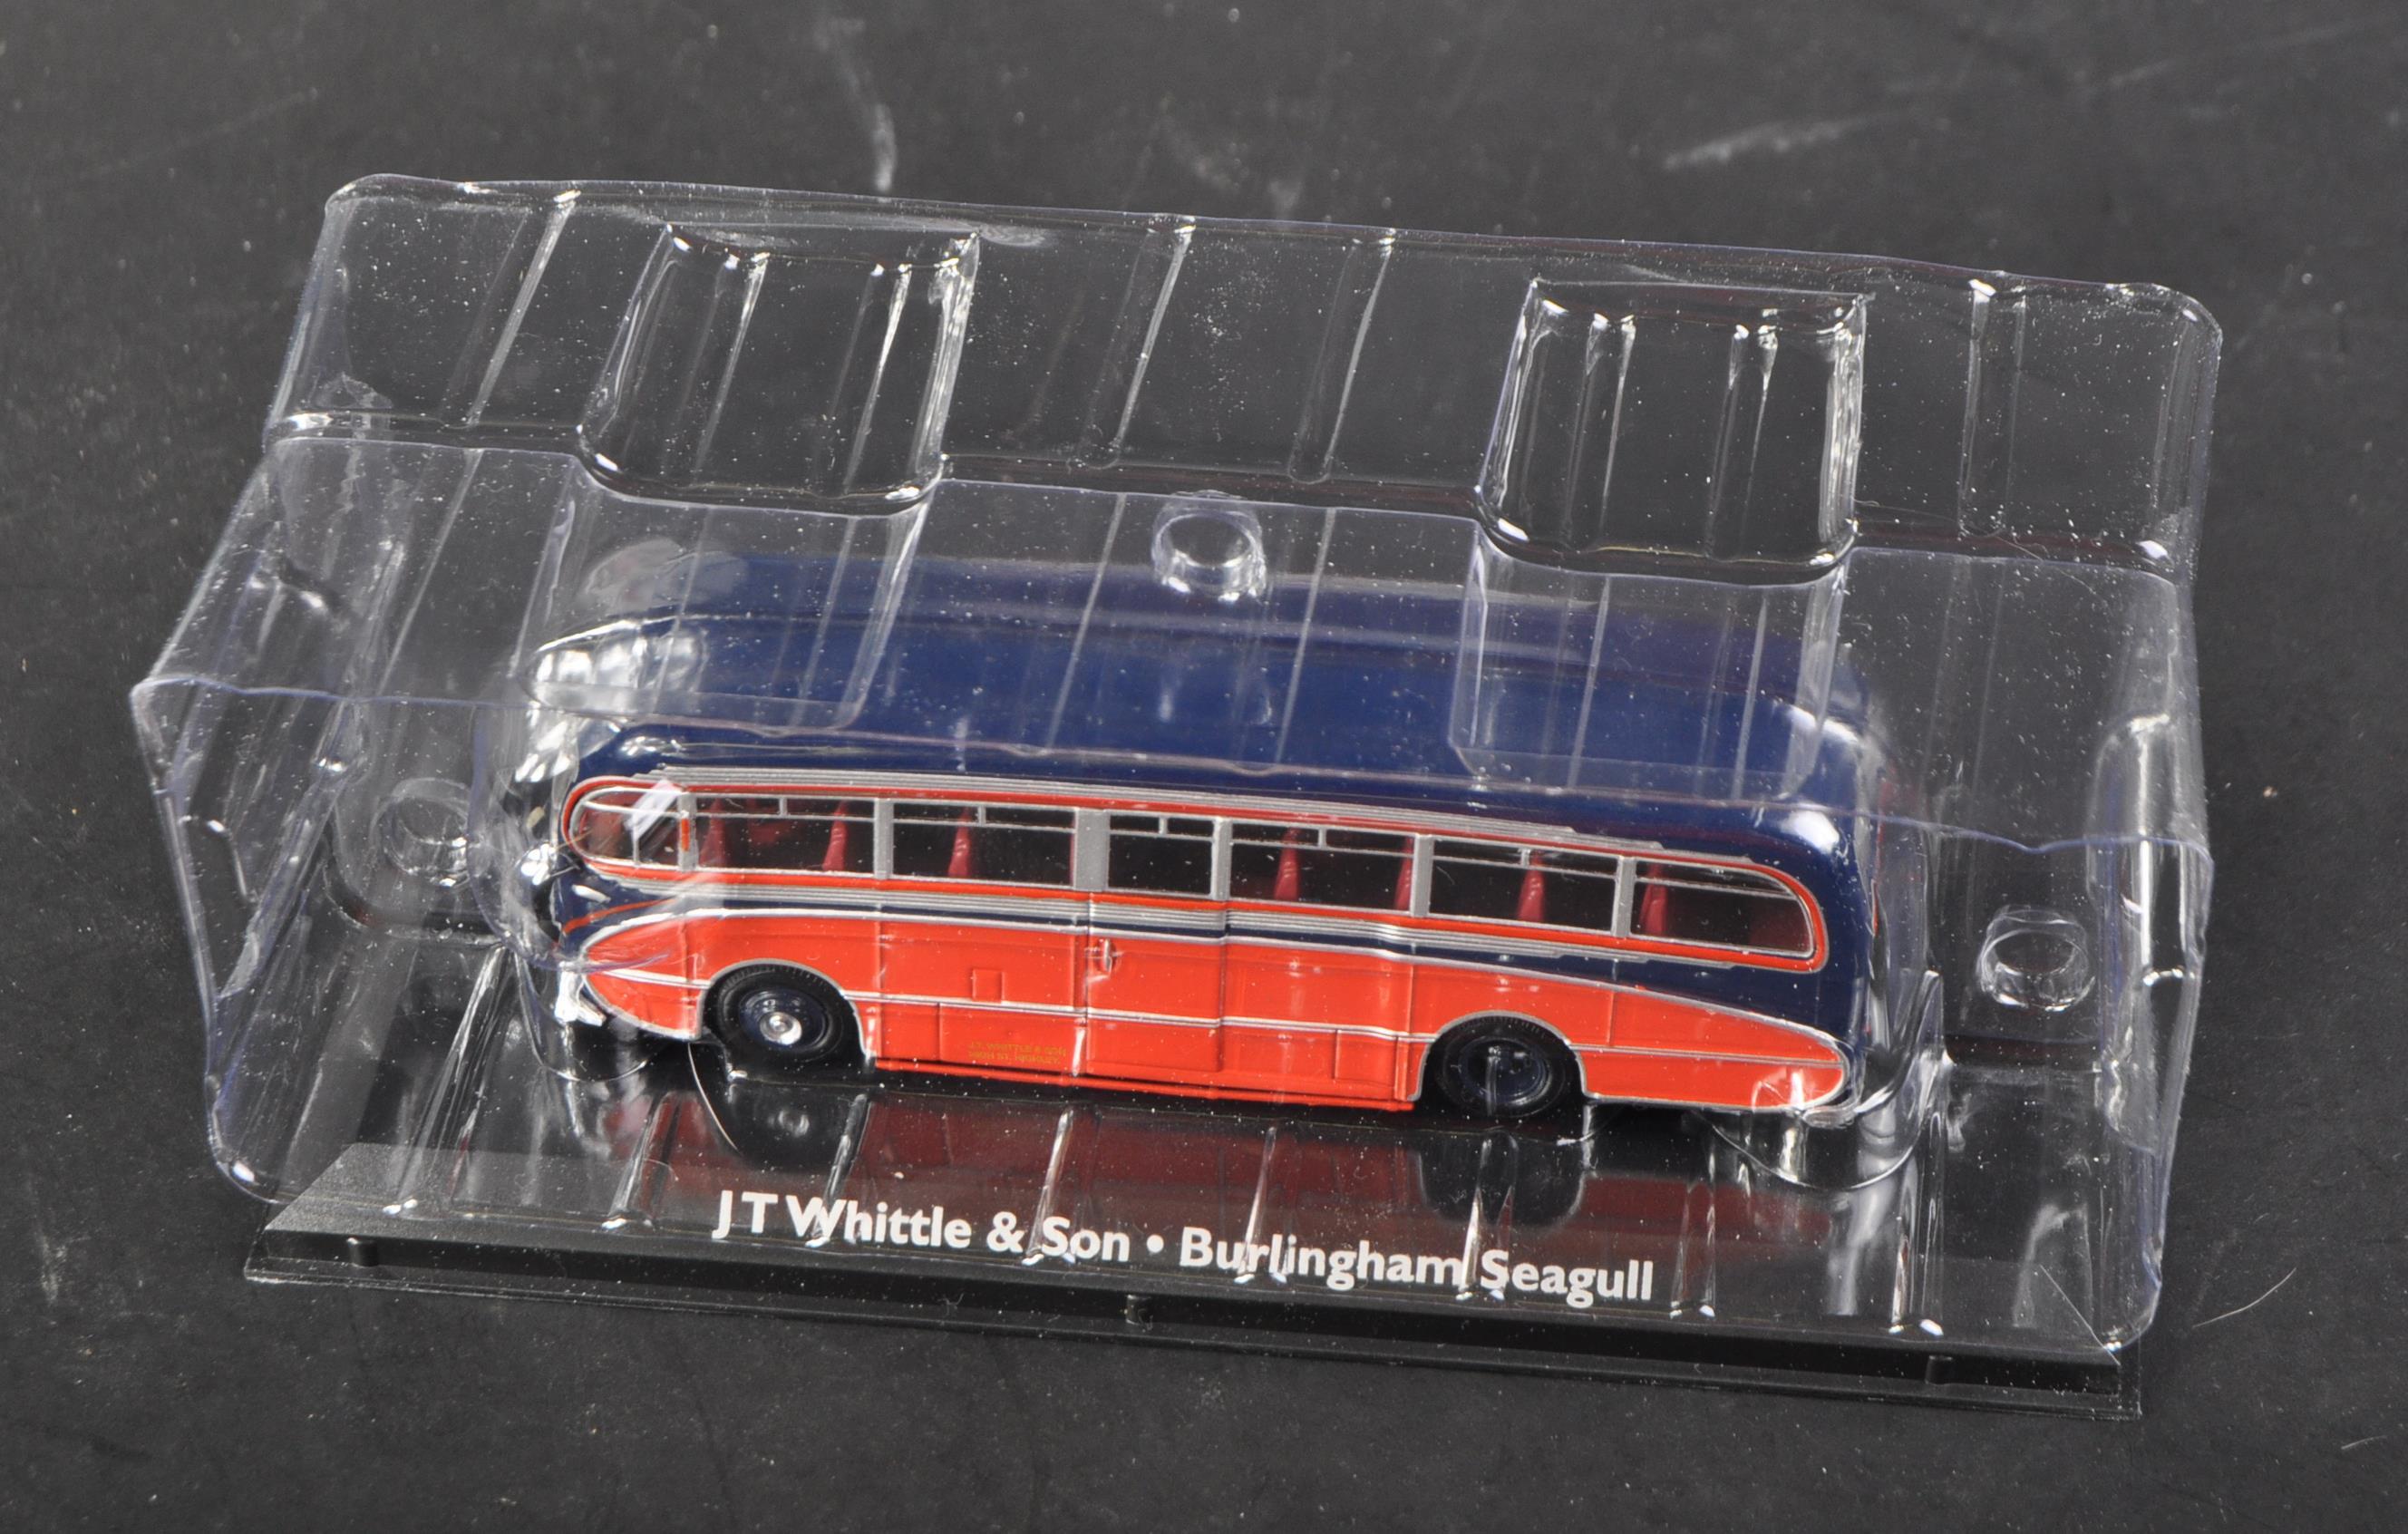 COLLECTION OF ATLAS EDITION CLASSIC COACHES DIECAST MODELS - Image 3 of 3